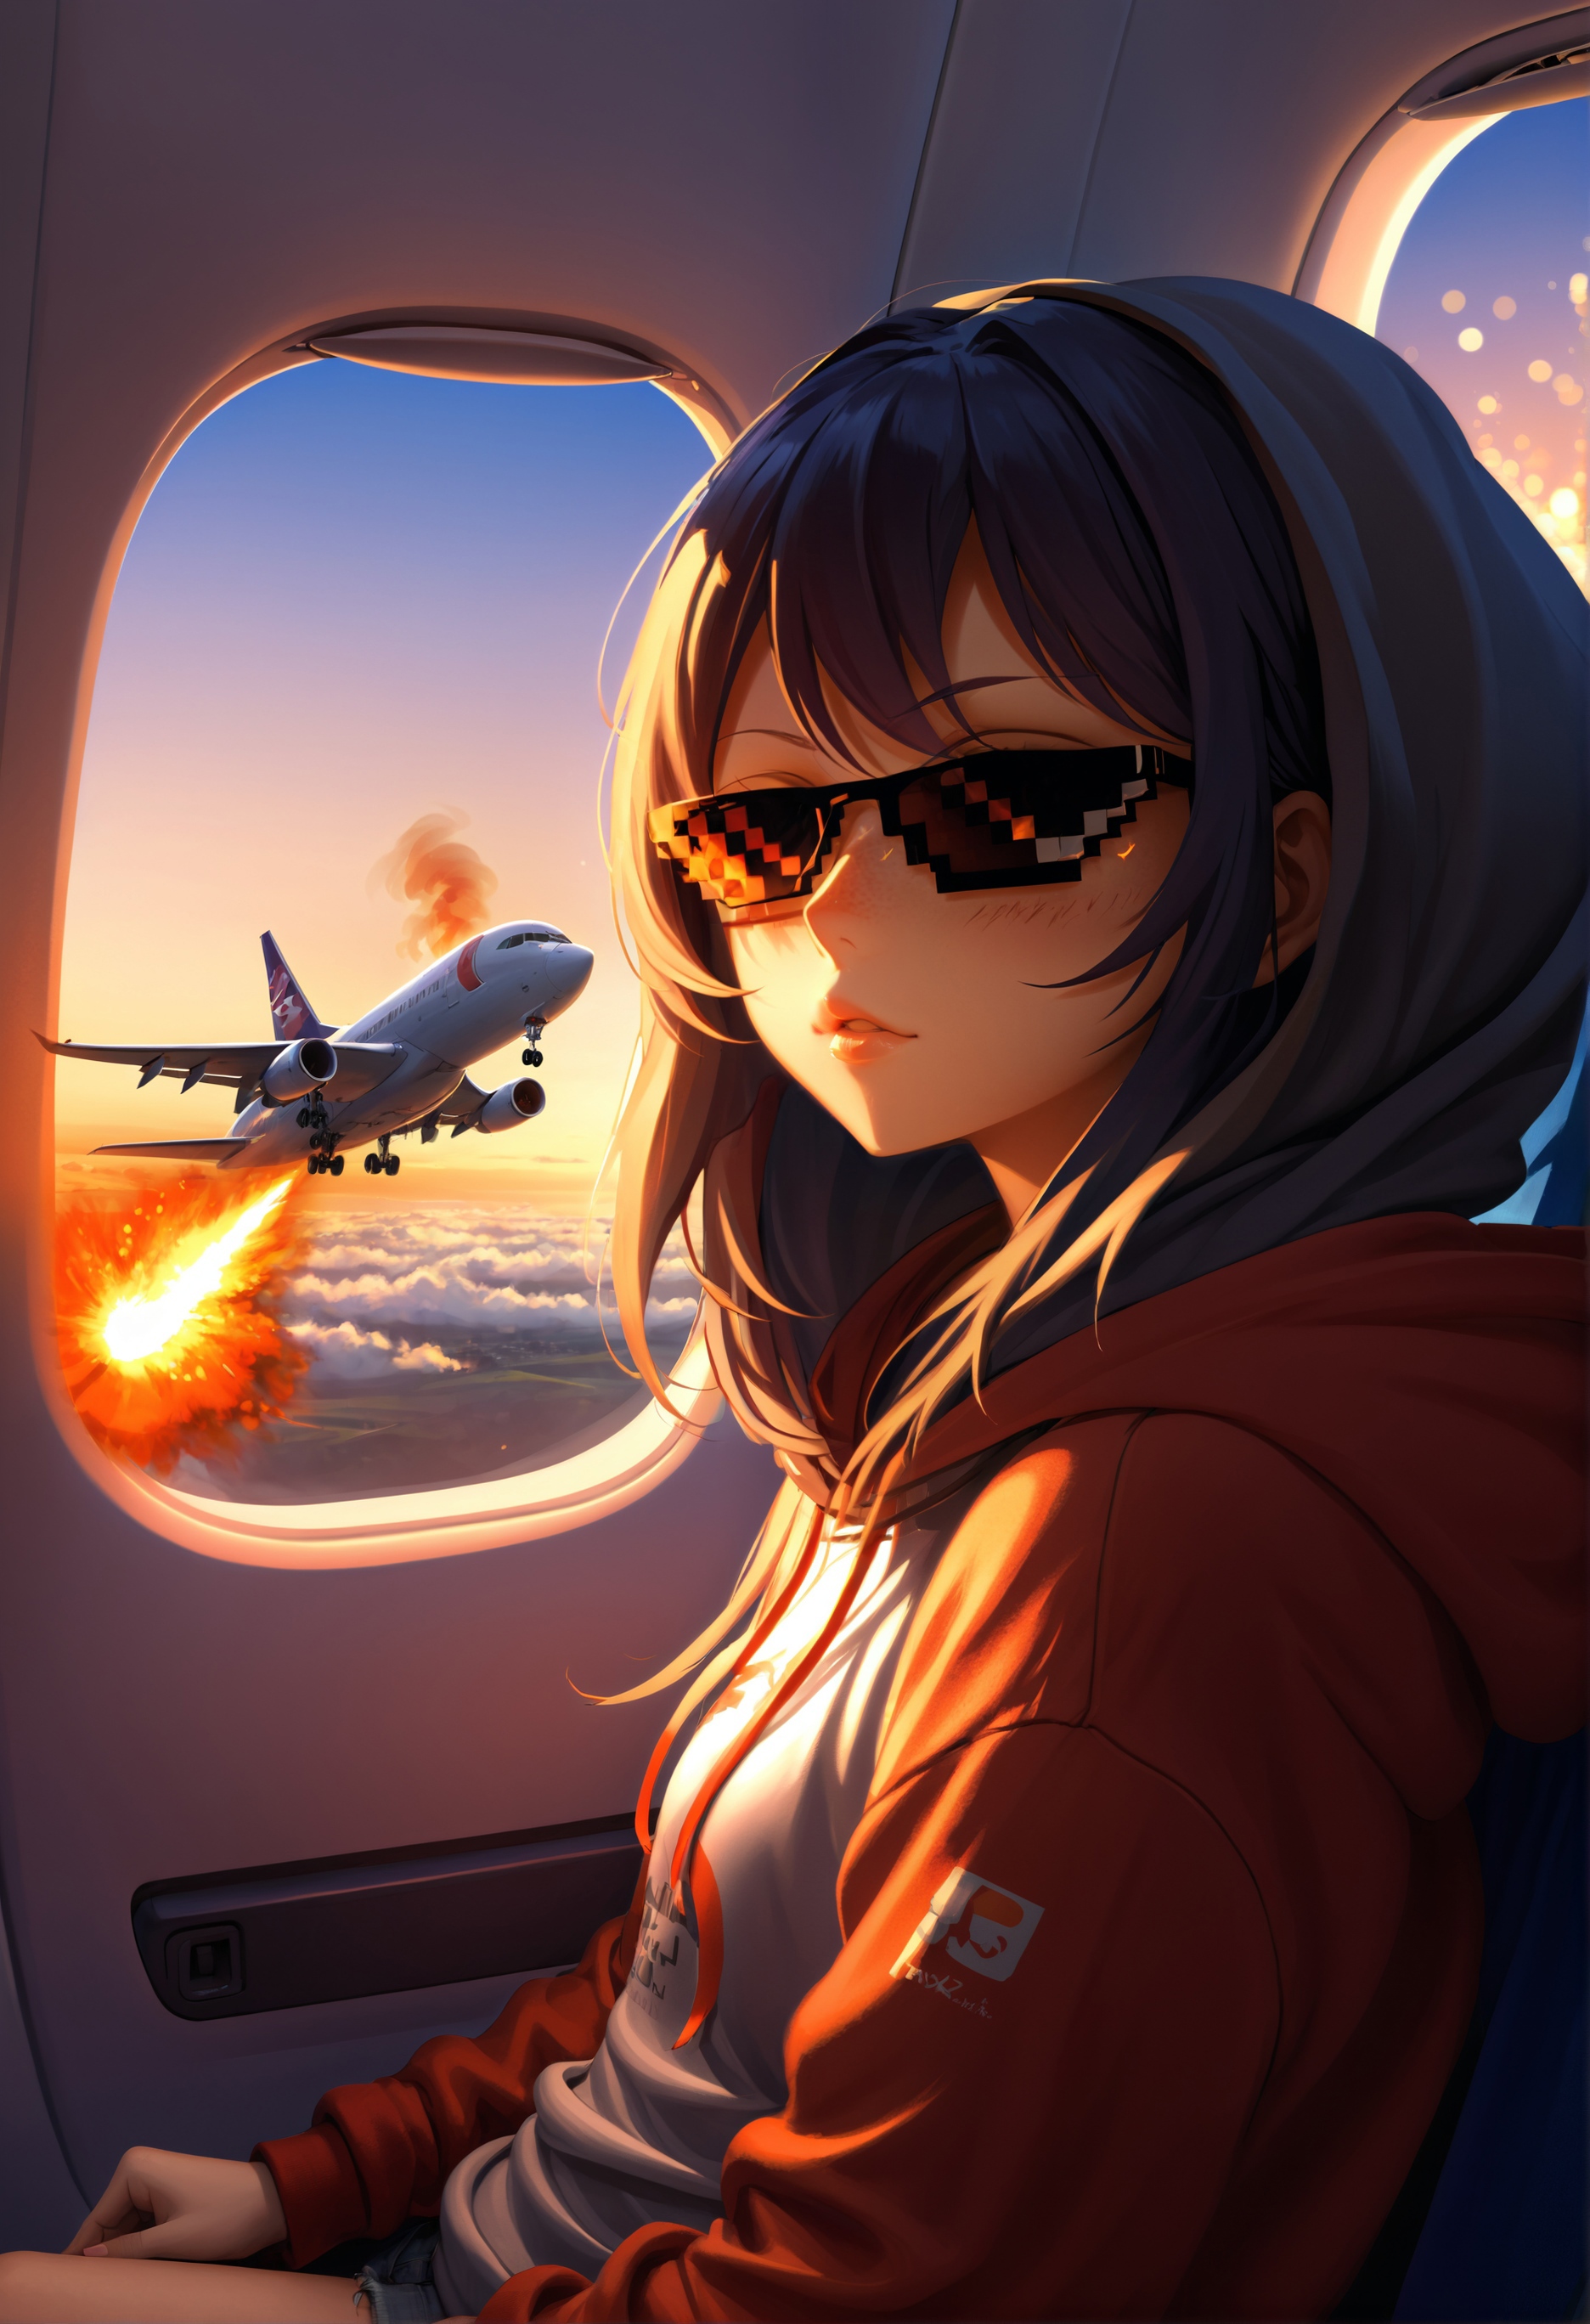 Mobile wallpaper: Anime, Sky, Airplane, Sunlight, Cloud, Original, Black  Hair, 852071 download the picture for free.